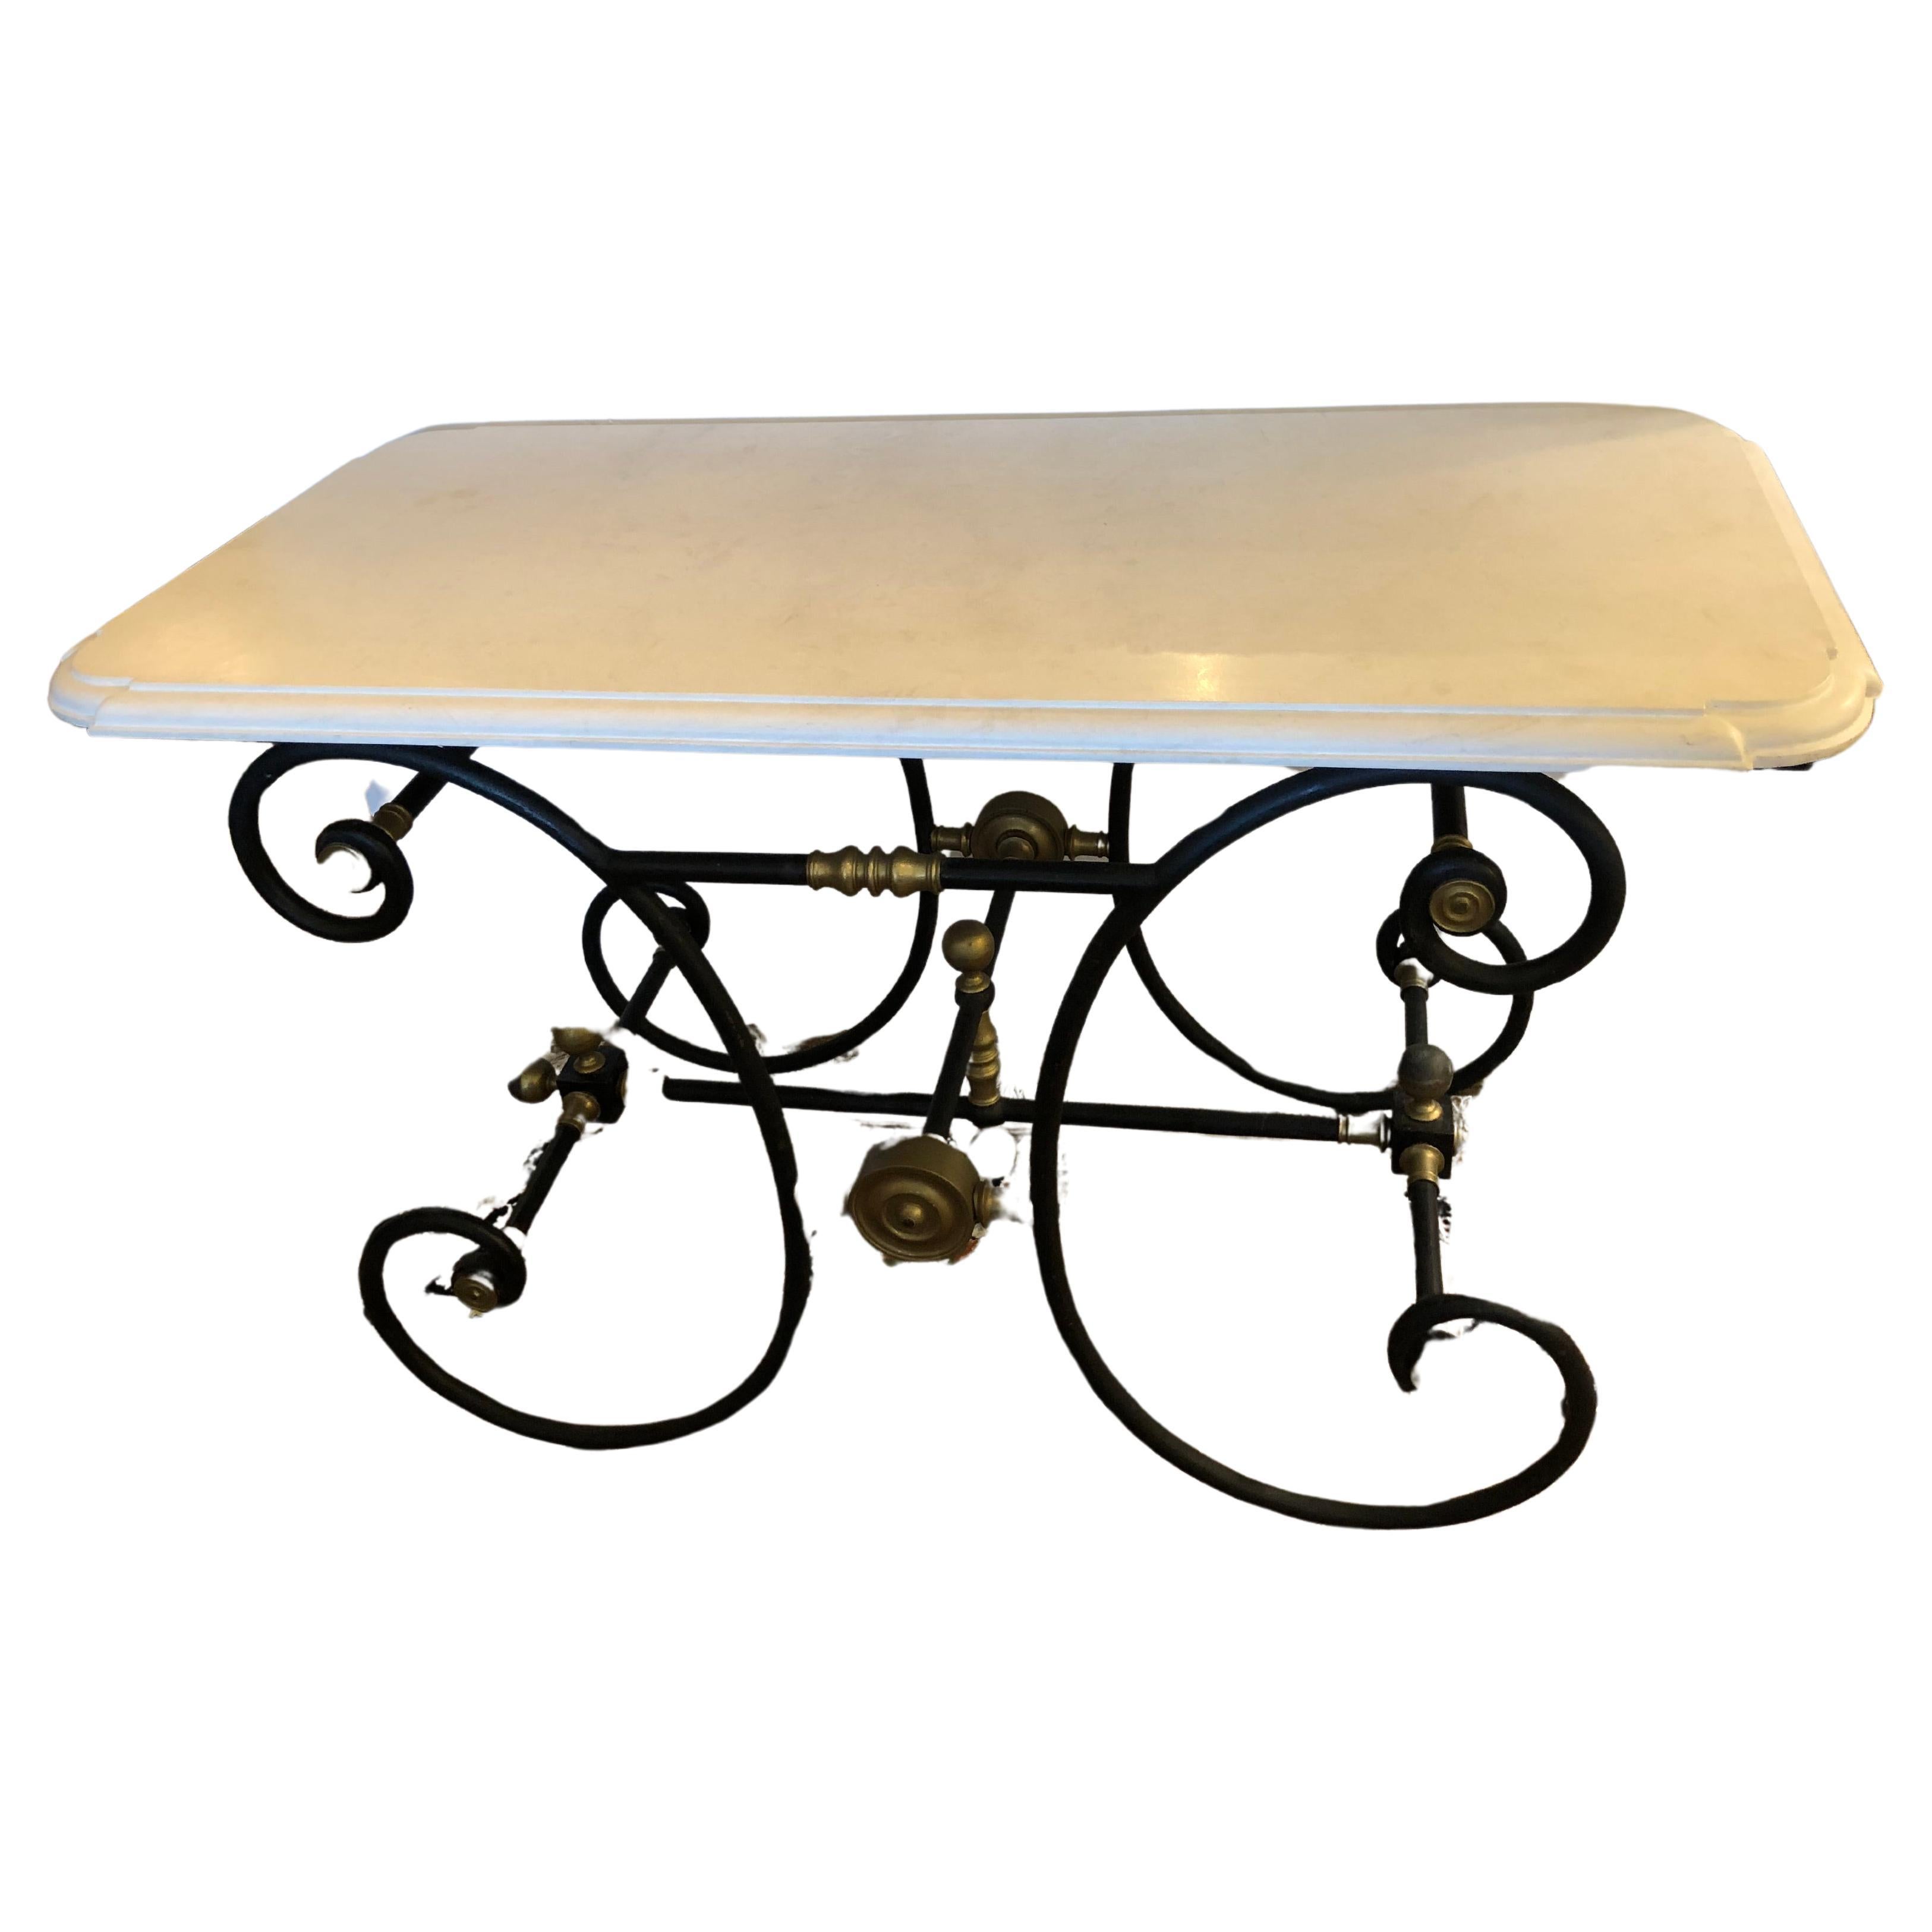 Vintage Wrought Iron & Travertine Patisserie Table Console Kitchen Island For Sale